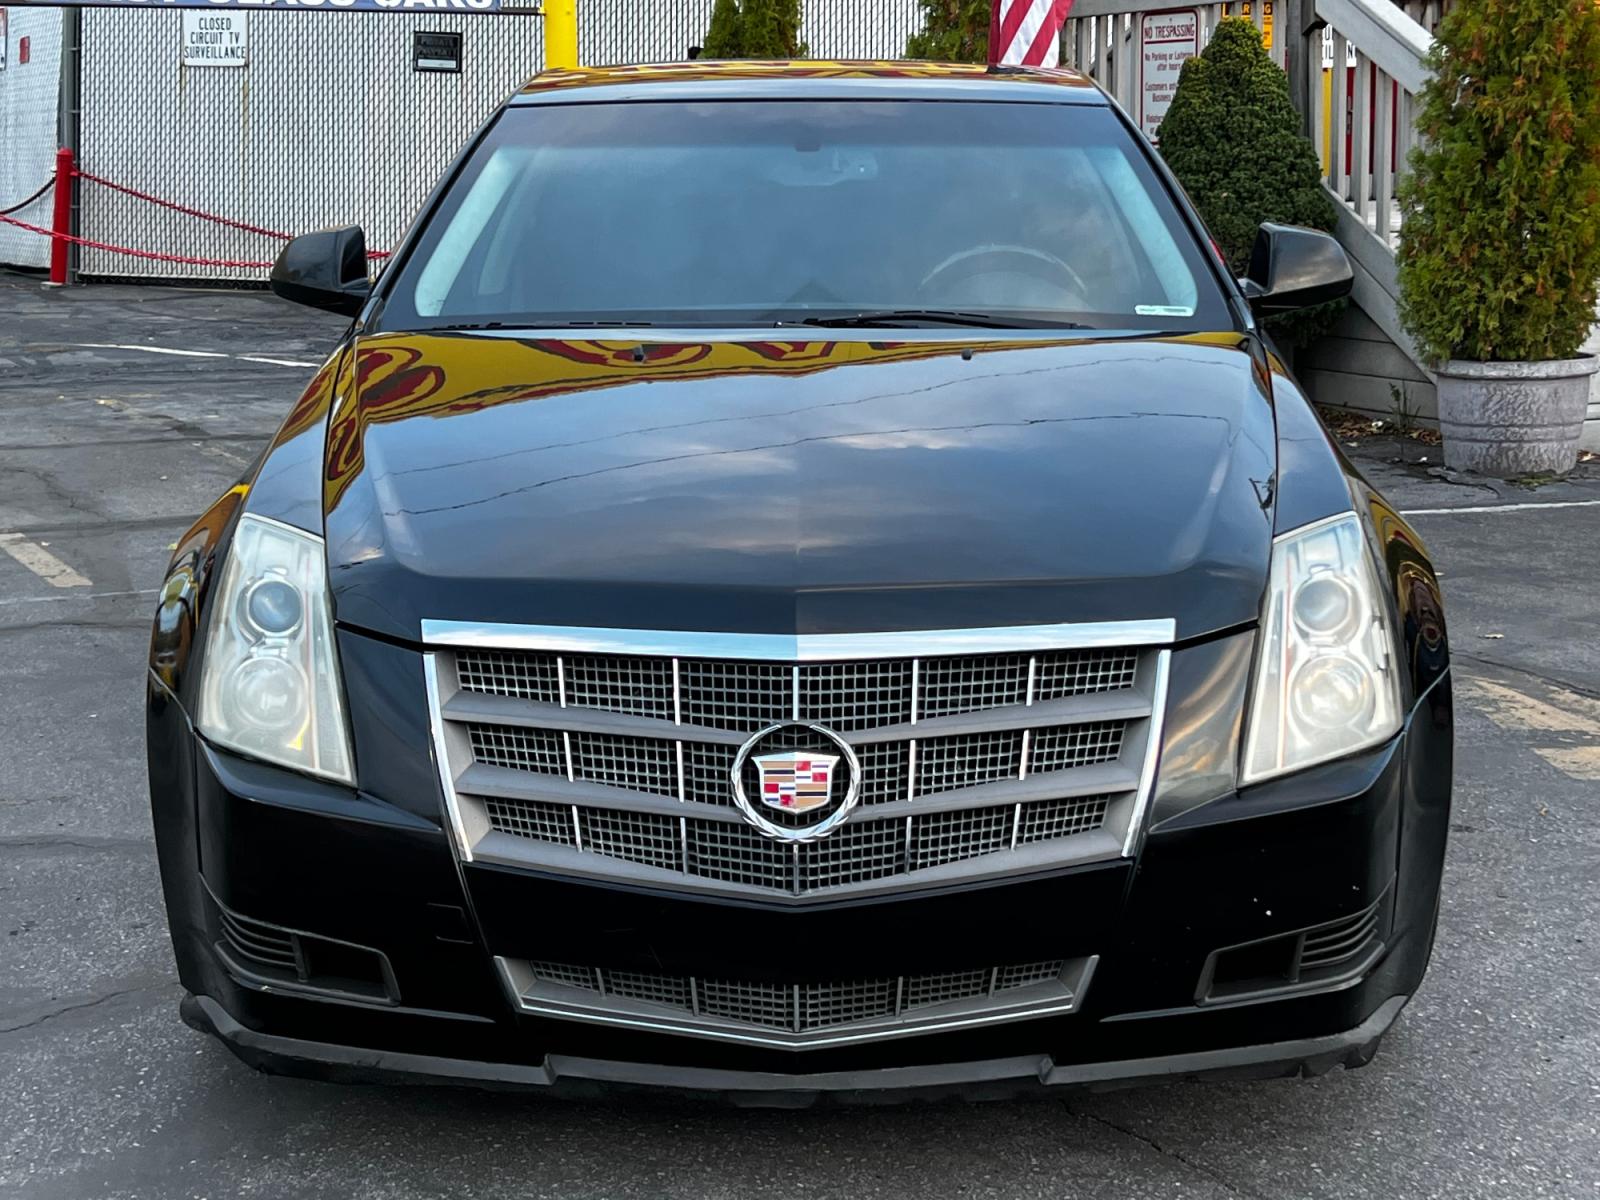 2008 Black /Black Leather Cadillac CTS 3.6L (1G6DM577980) with an 3.6L V6 engine, Automatic transmission, located at 801 South State Street, Salt Lake City, UT, 84111, (801) 328-0098, 40.751953, -111.888206 - Life is crazy. Now is the time to buy! All of our prices are just dollars above our cost. These prices will change as soon as life isn't so crazy. So please call or come in. We are here to save you a lot of money! Our service department is OPEN DAILY to help with any of your service need - Photo #3